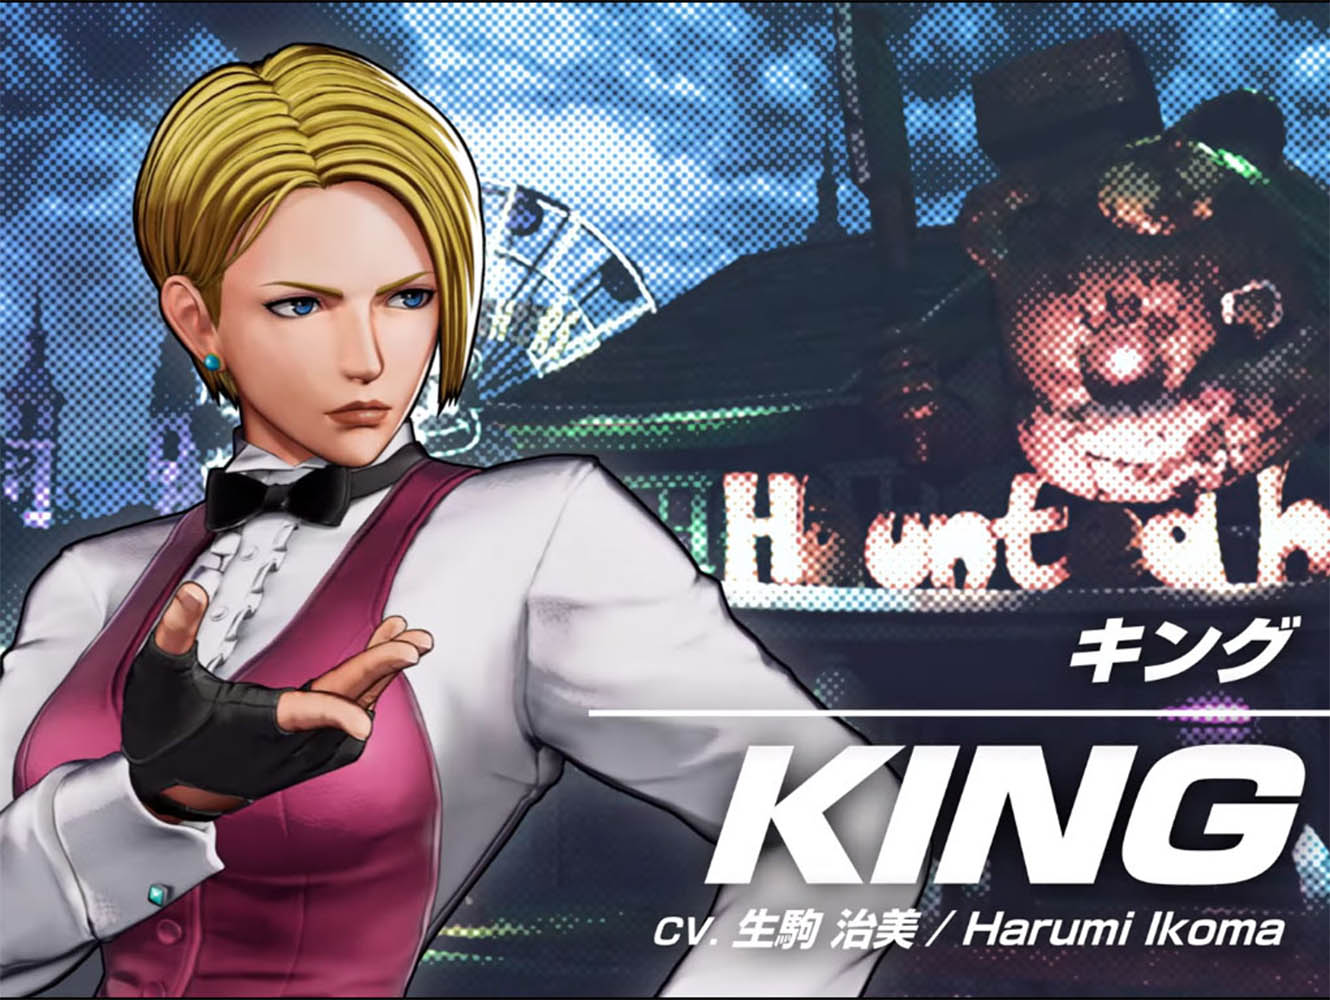 King The king of Fighters XV